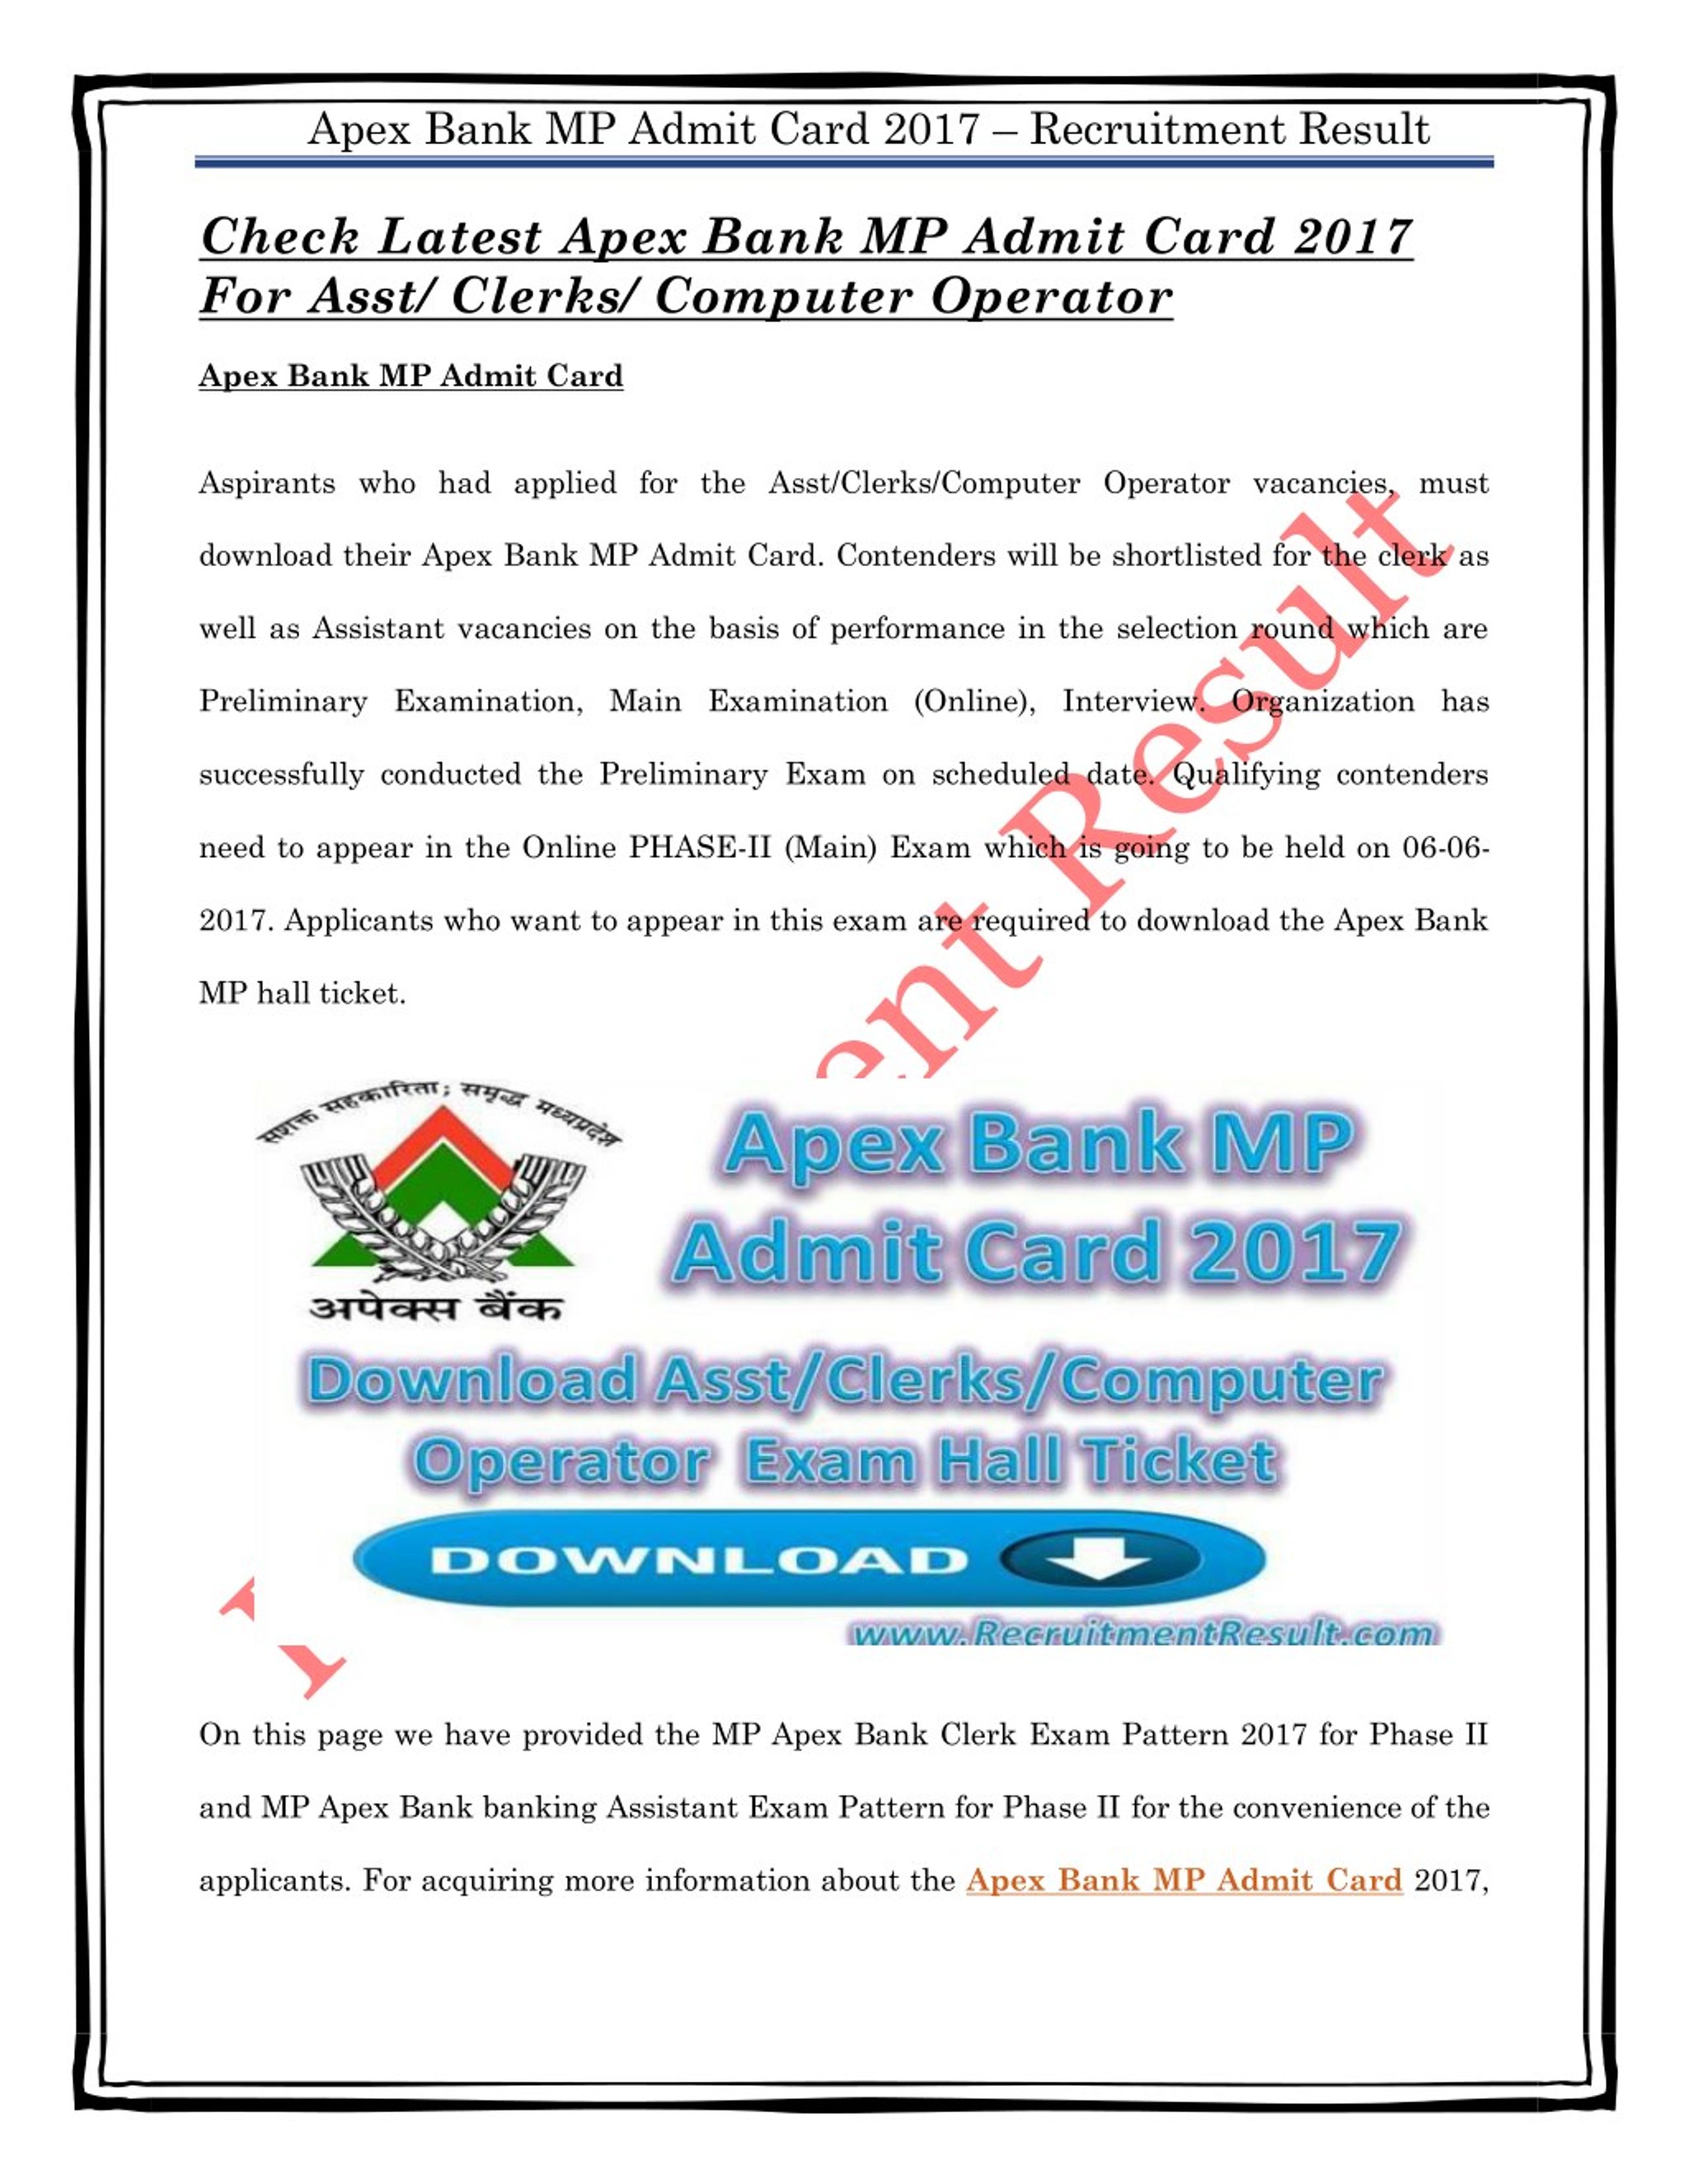 Ppt Check Latest Apex Bank Mp Admit Card 17 For Asst Clerks Computer Operator Powerpoint Presentation Id